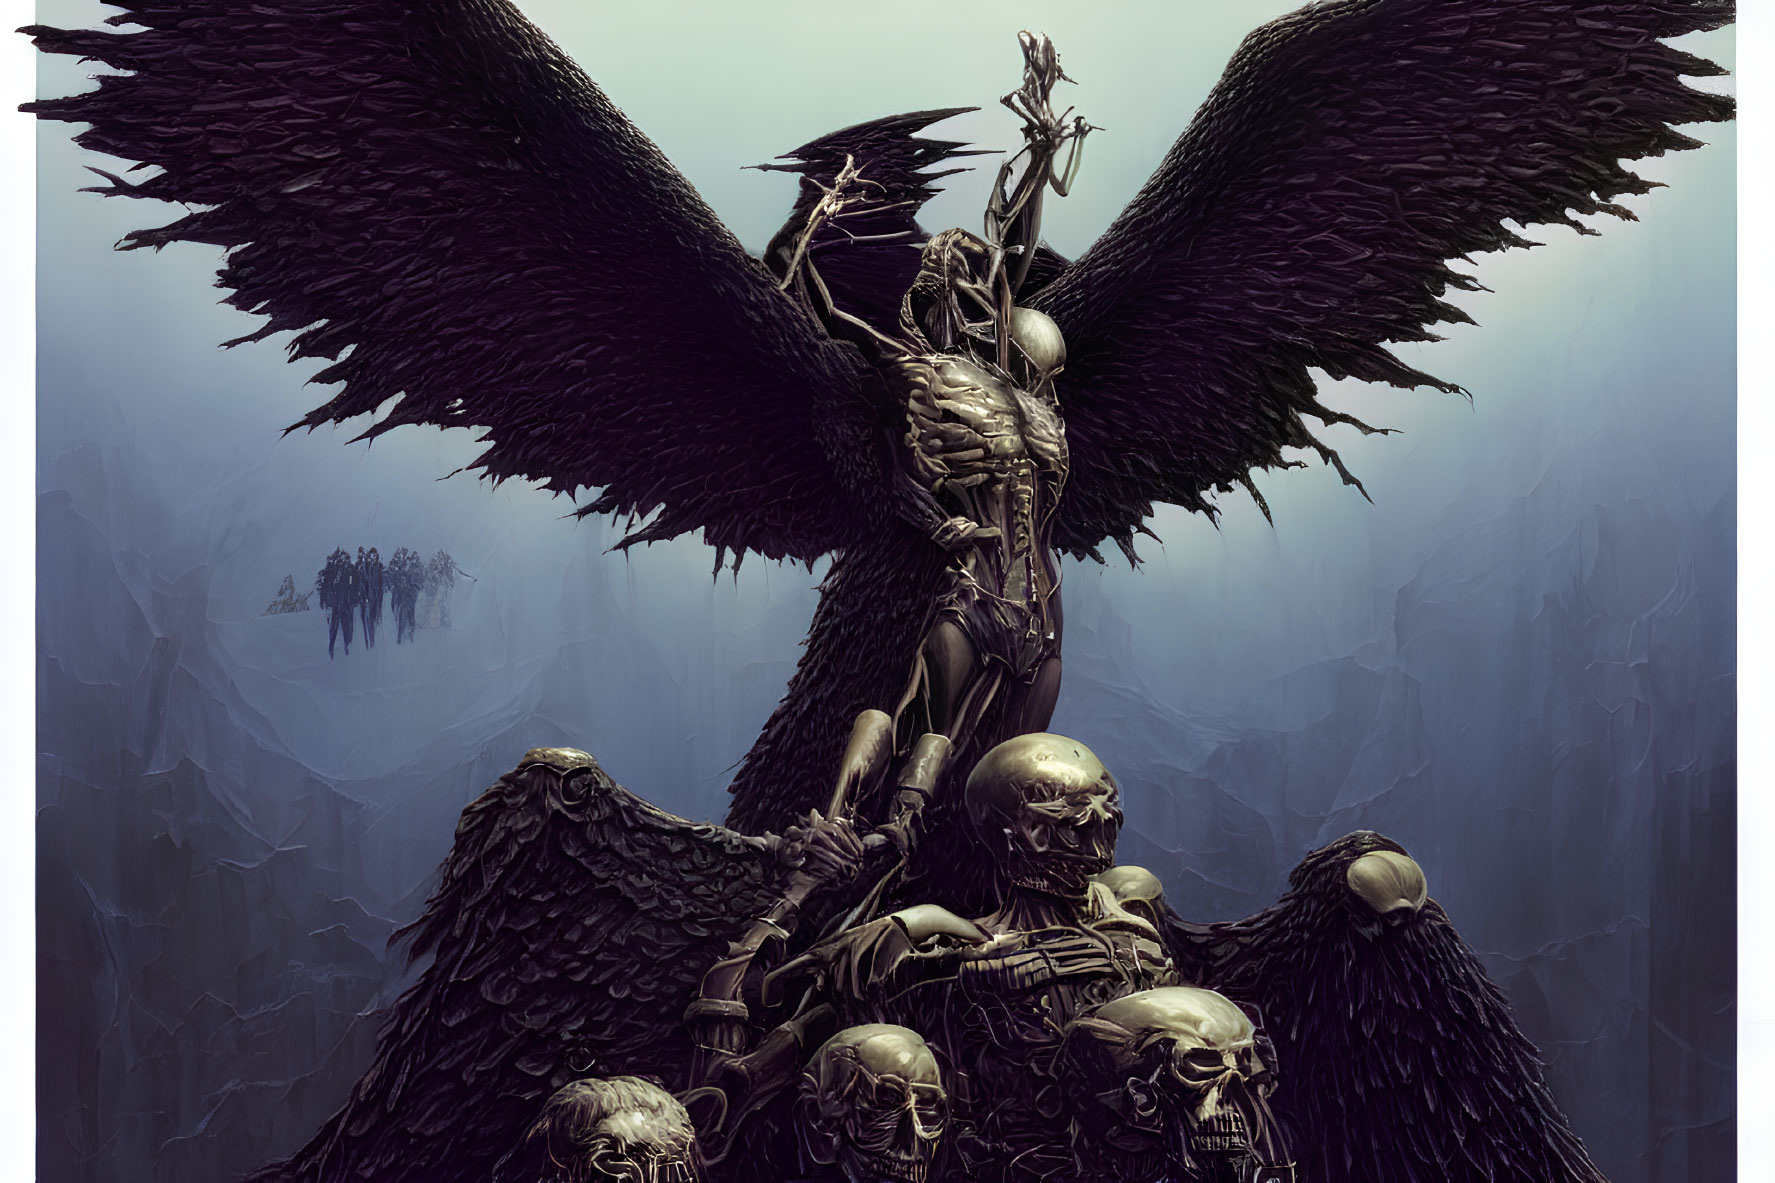 Fantasy figure with large wings and spear on skull pile, ghostly figures in background